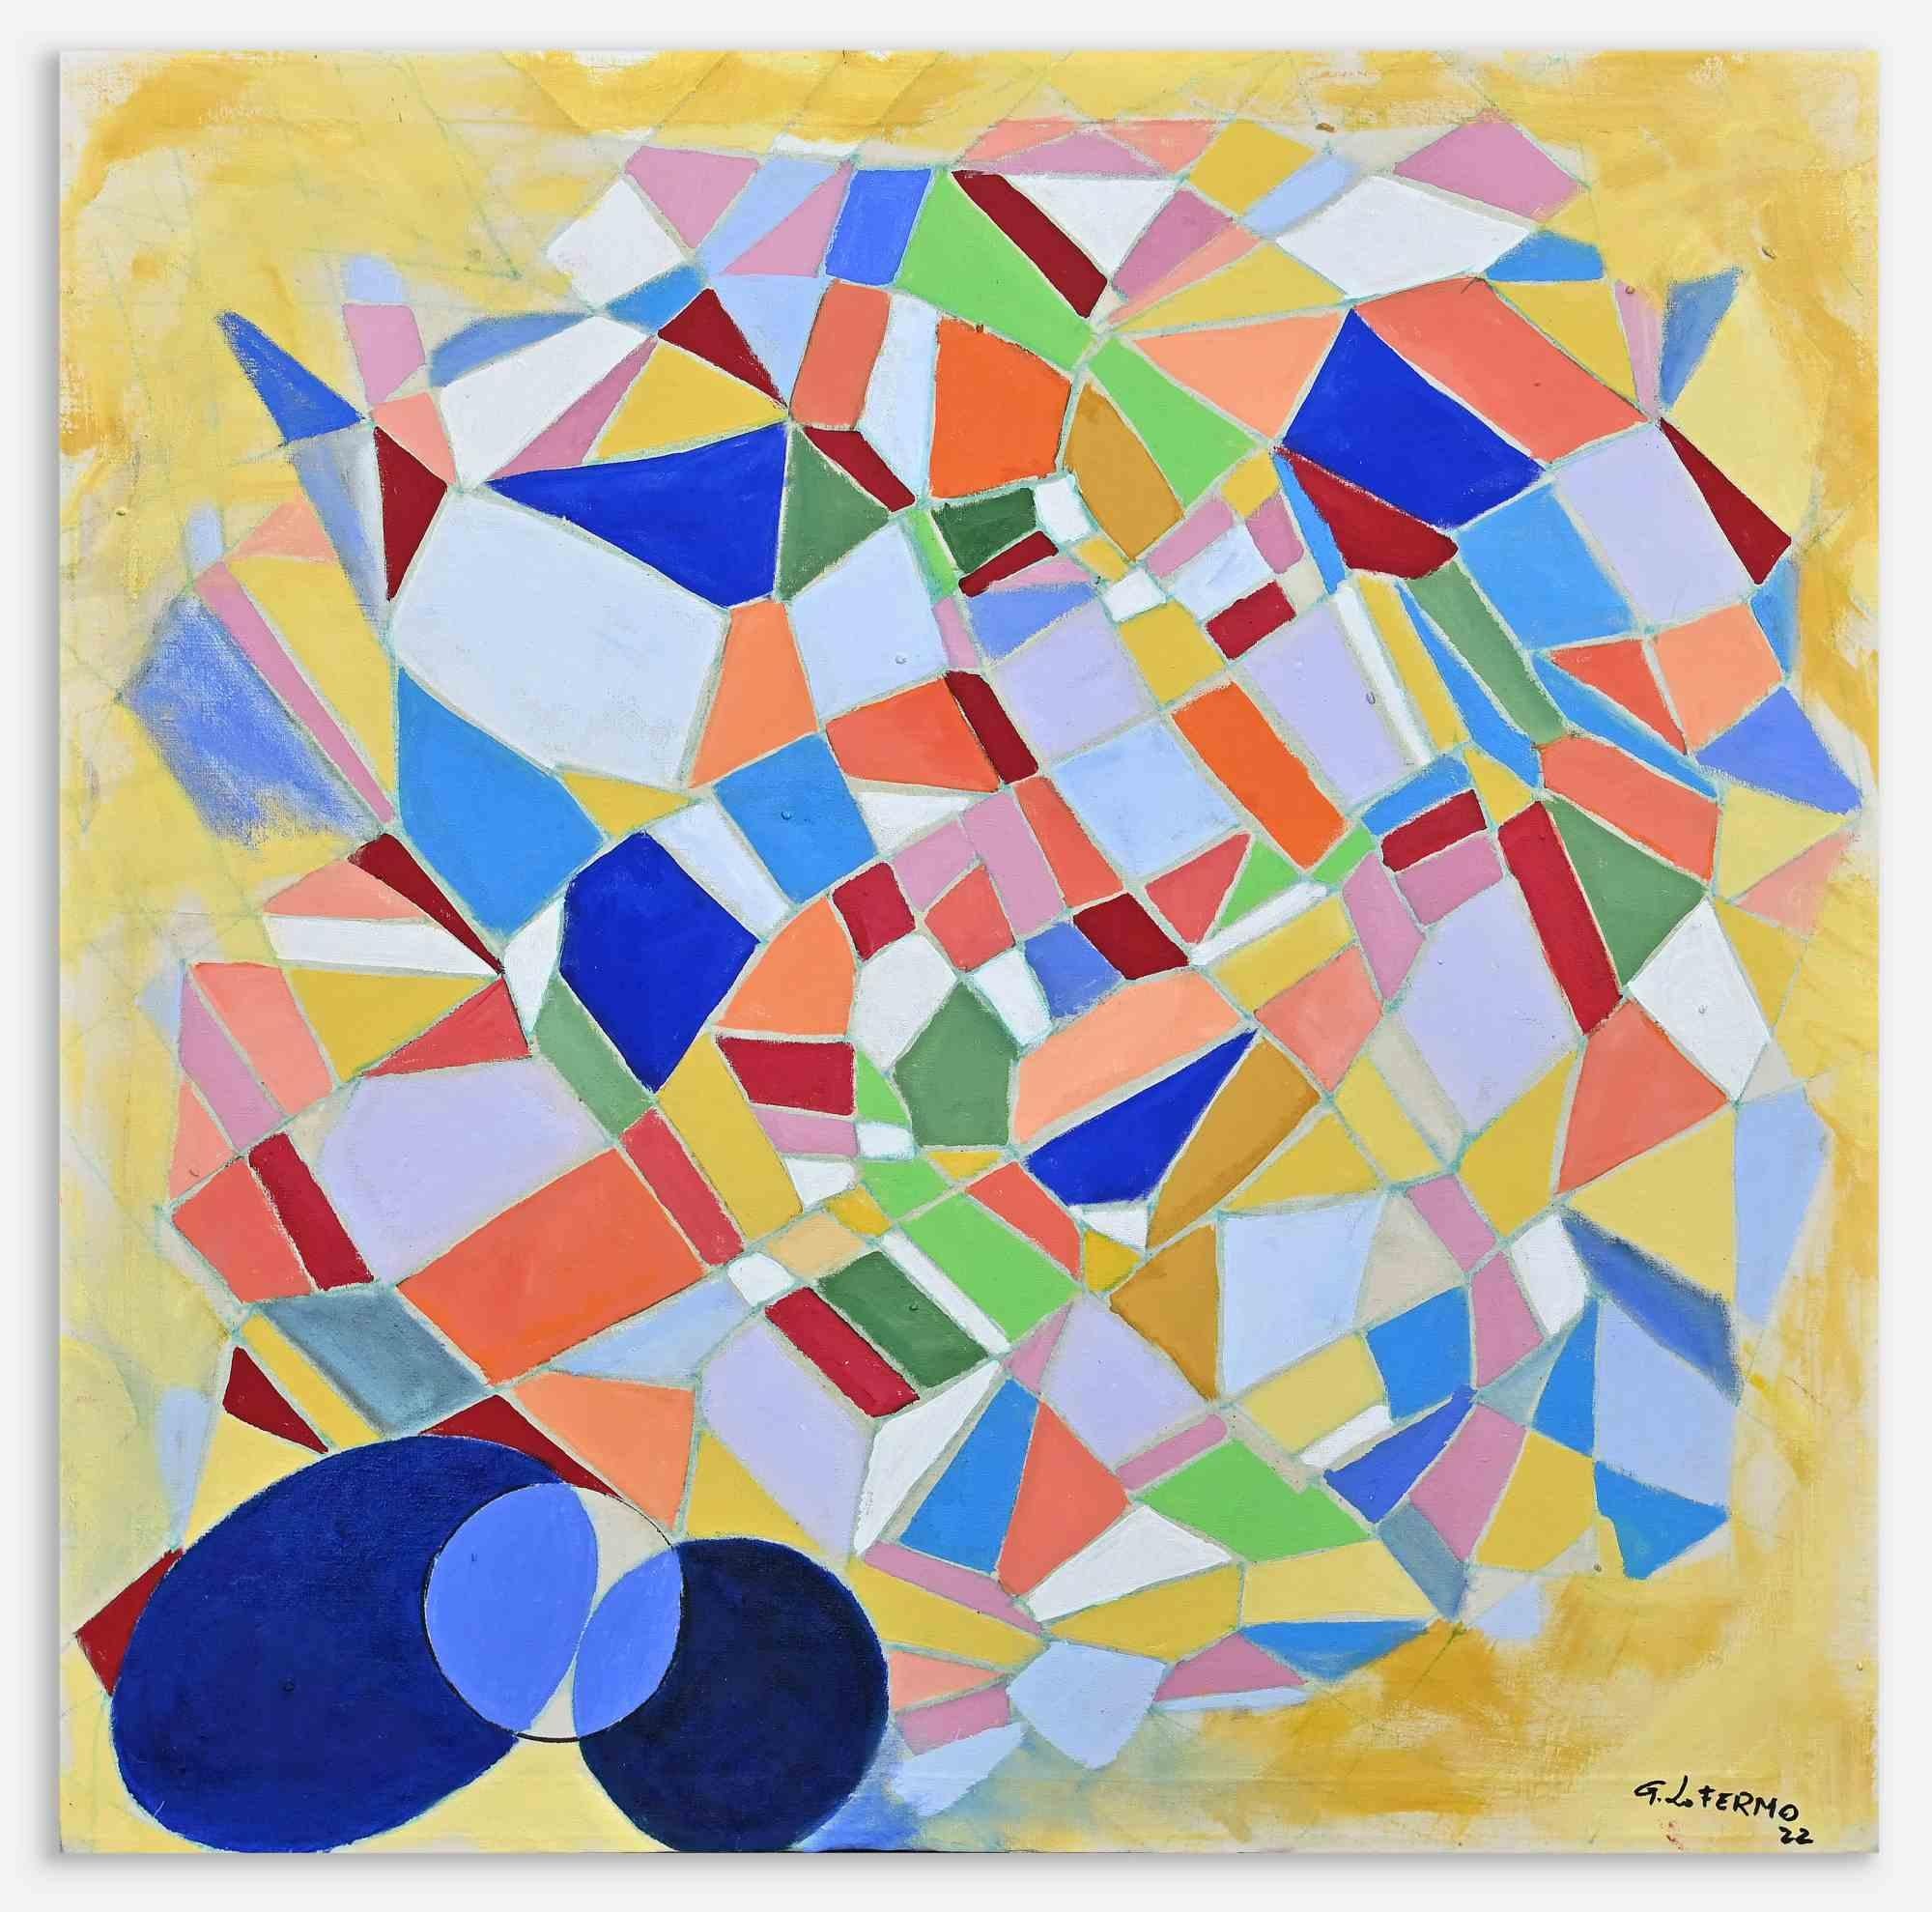 Abstract Composition is an original artwork realized by Giorgio Lo Fermo (b. 1947) in 2022

Original Oil Painting on Canvas.

Hand signed and dated on the lower right margin.

Hand signed, dated on the back of the canvas.

Good conditions.

Giorgio